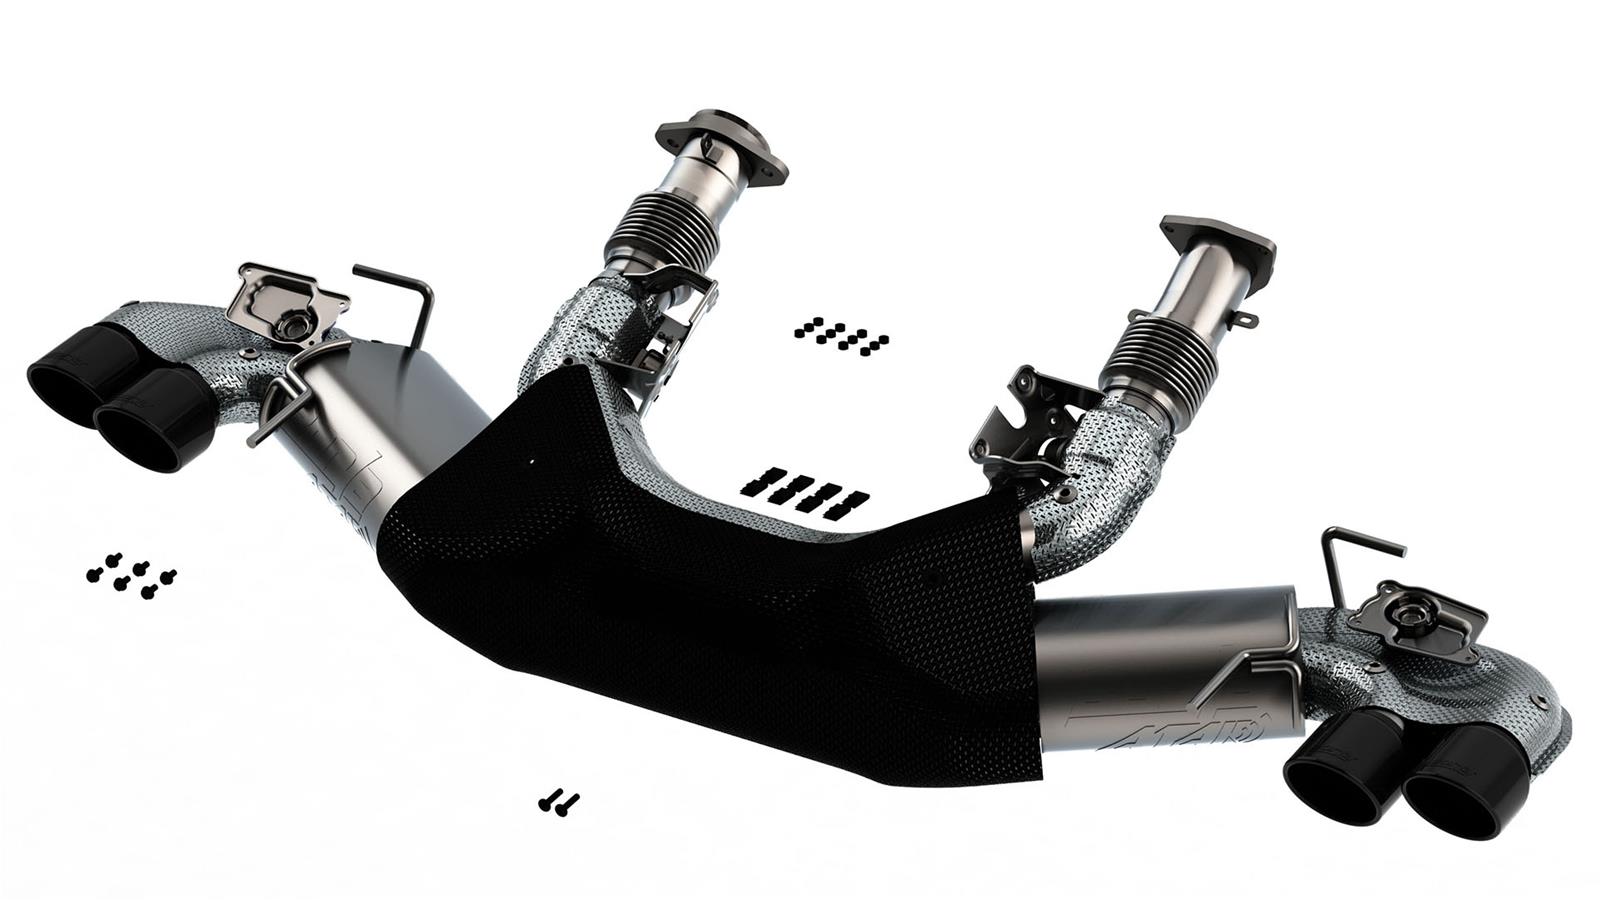 Borla S-Type Cat-Back Exhaust Systems